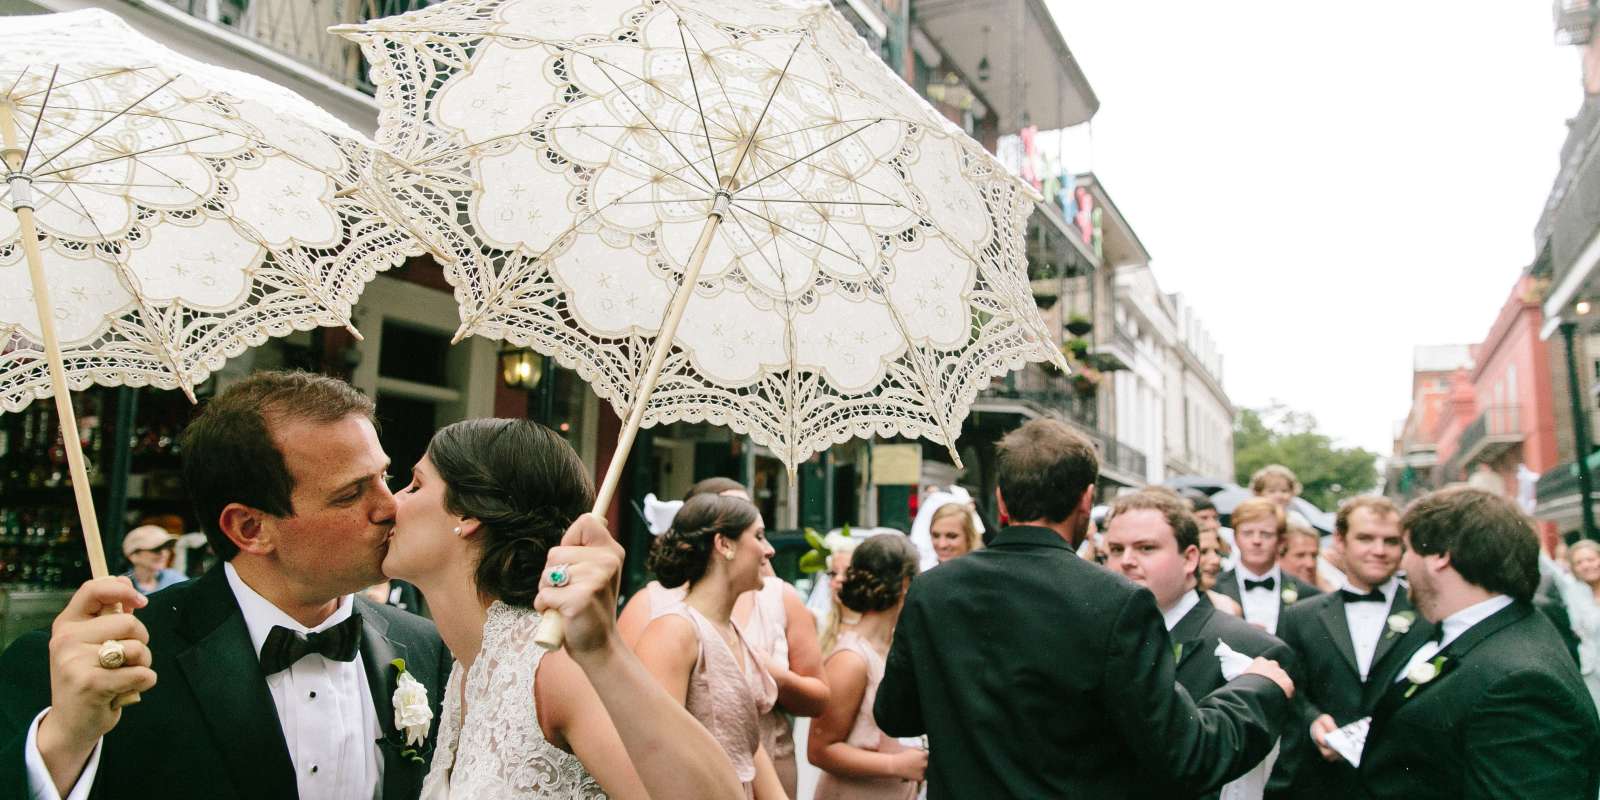 French Quarter bride and groom